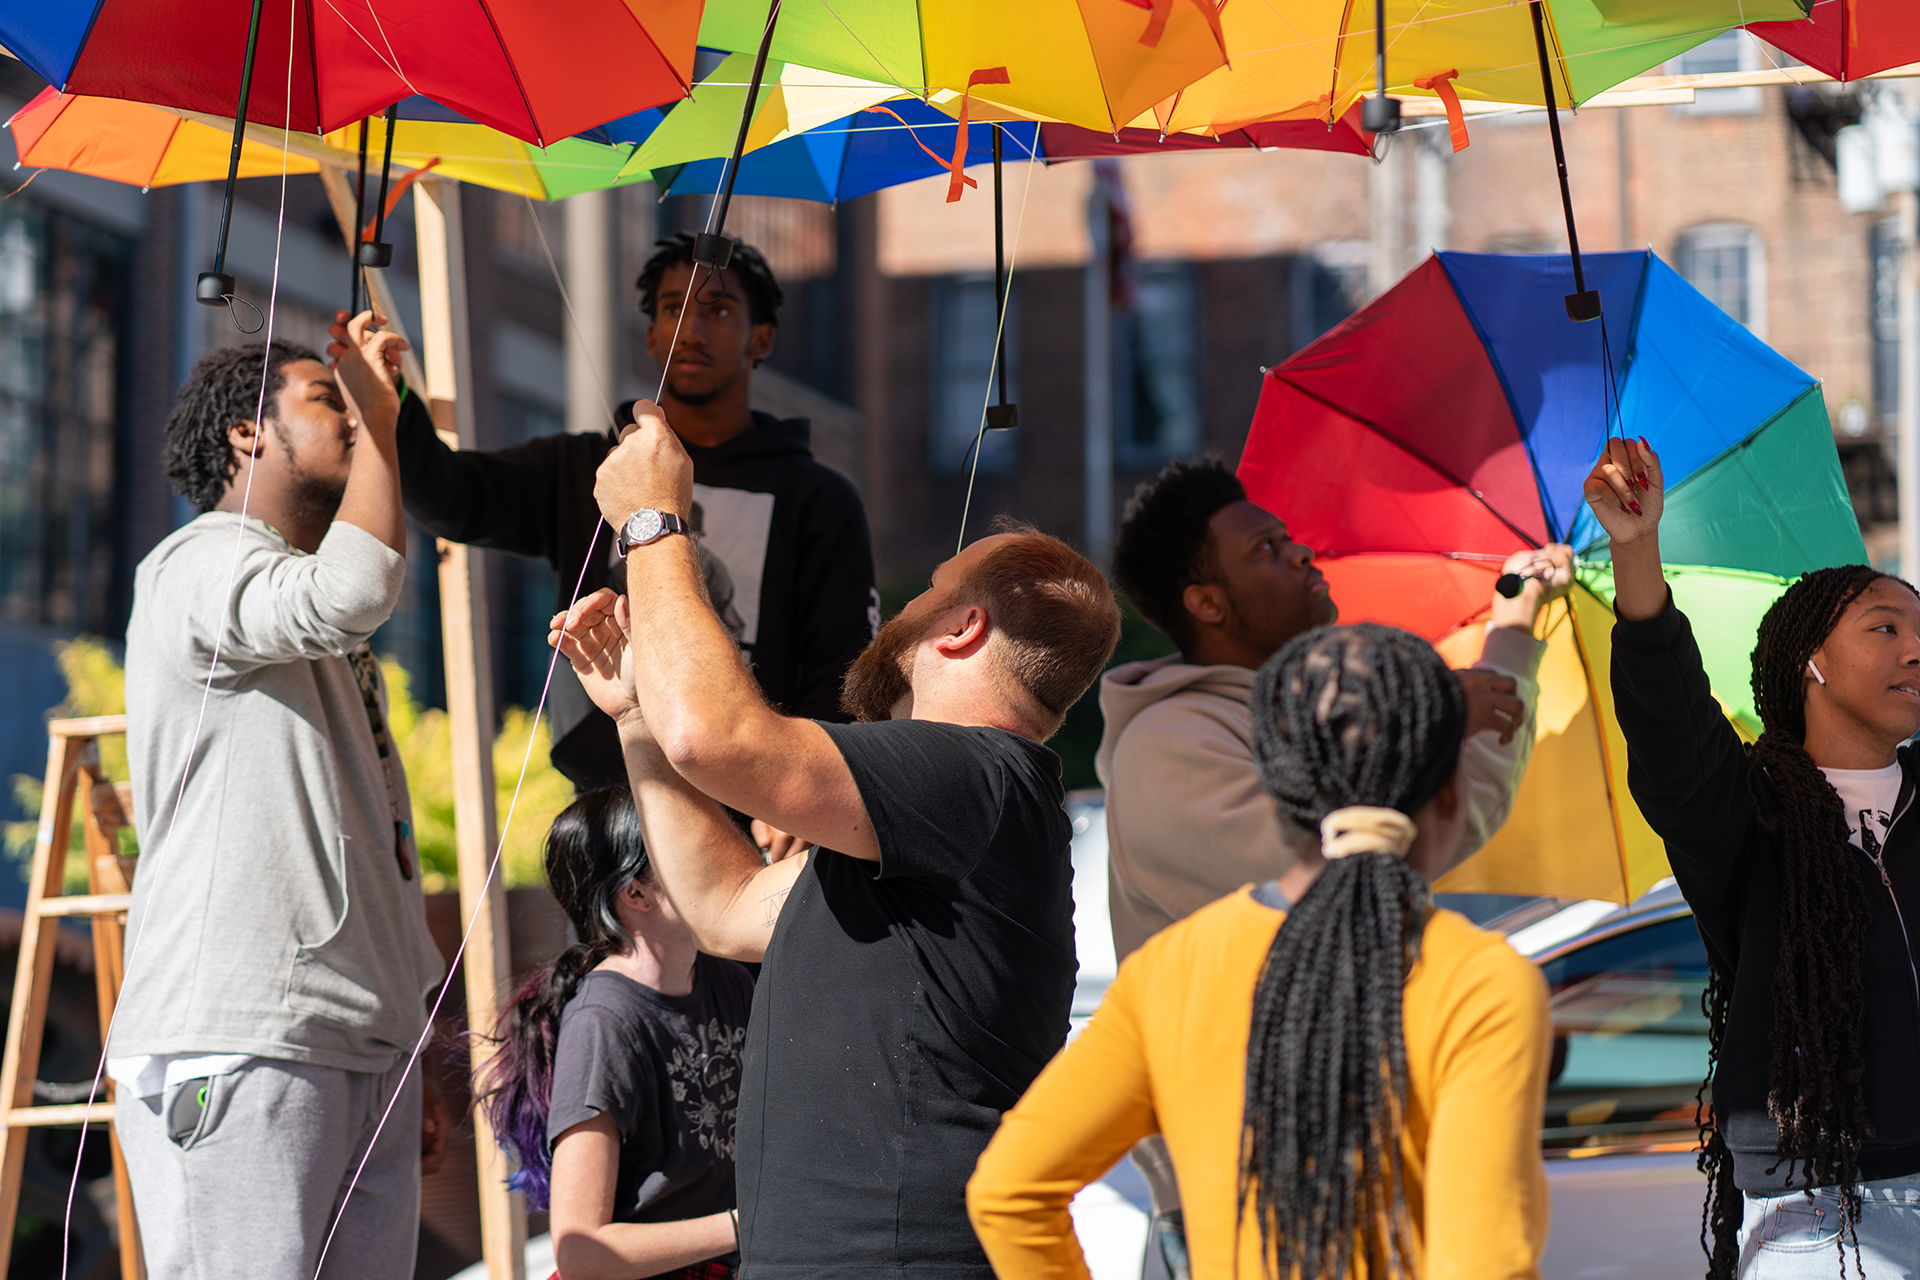 https://aap.cornell.edu/A%20group%20of%20people%20work%20together%20to%20put%20up%20rainbow%20umbrellas